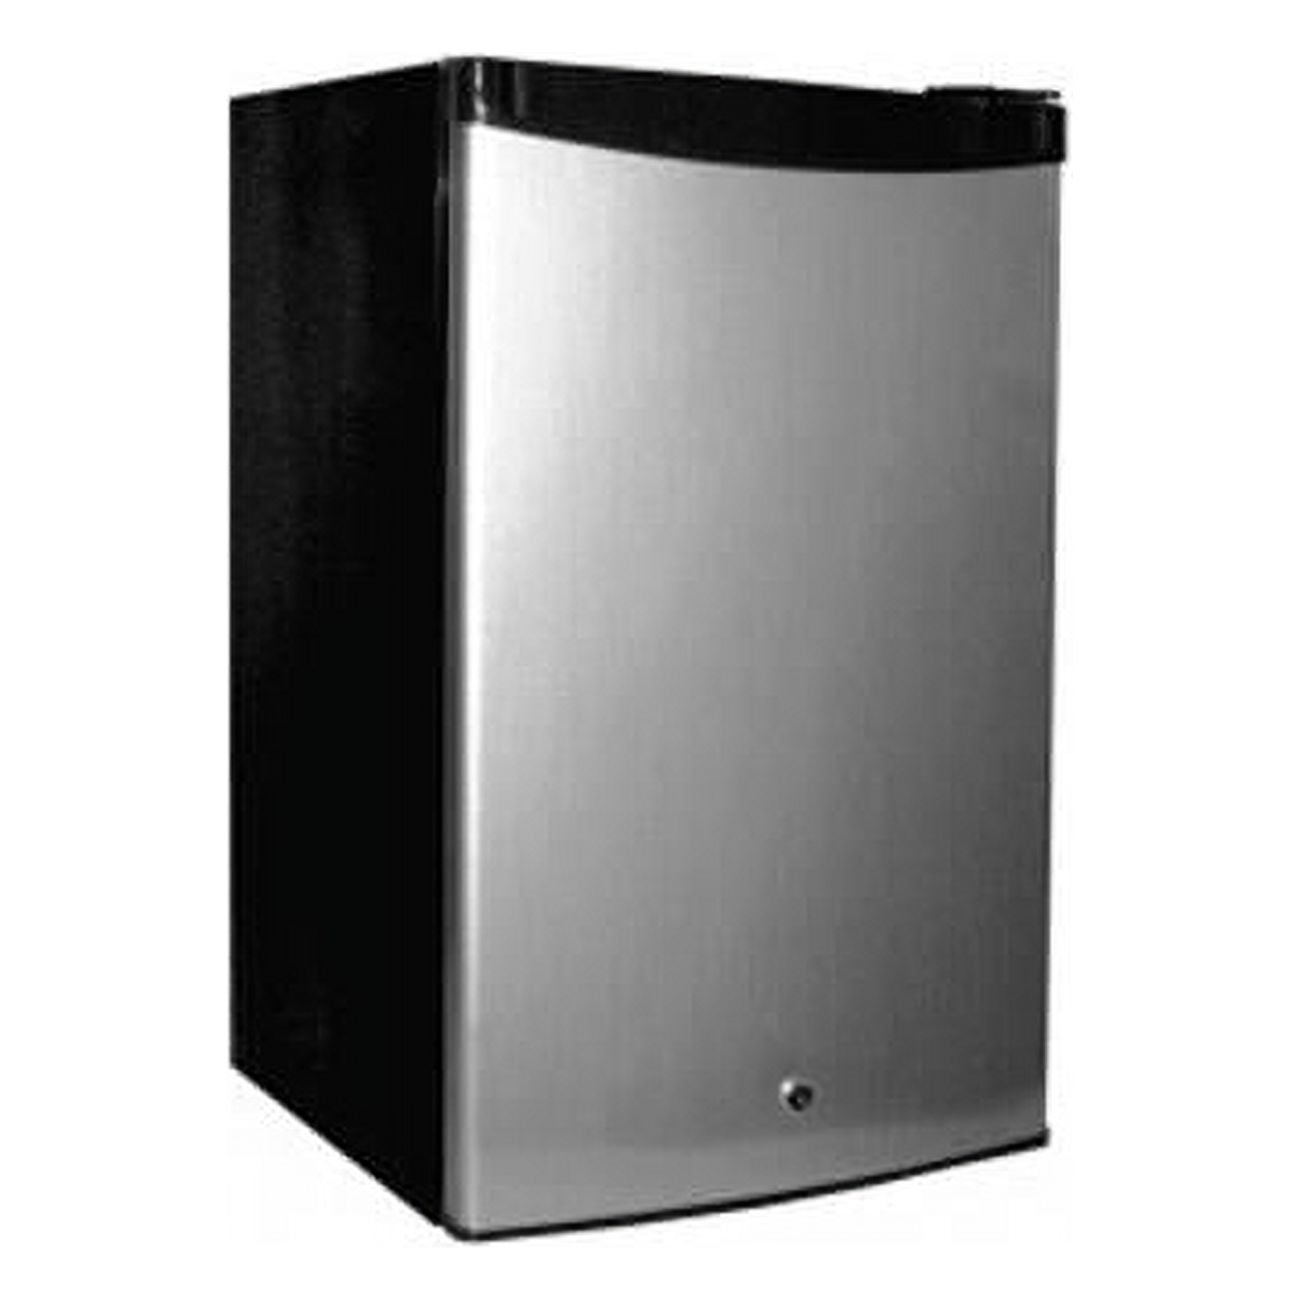 4.5 Ft. Refrigerator, Stainless Steel